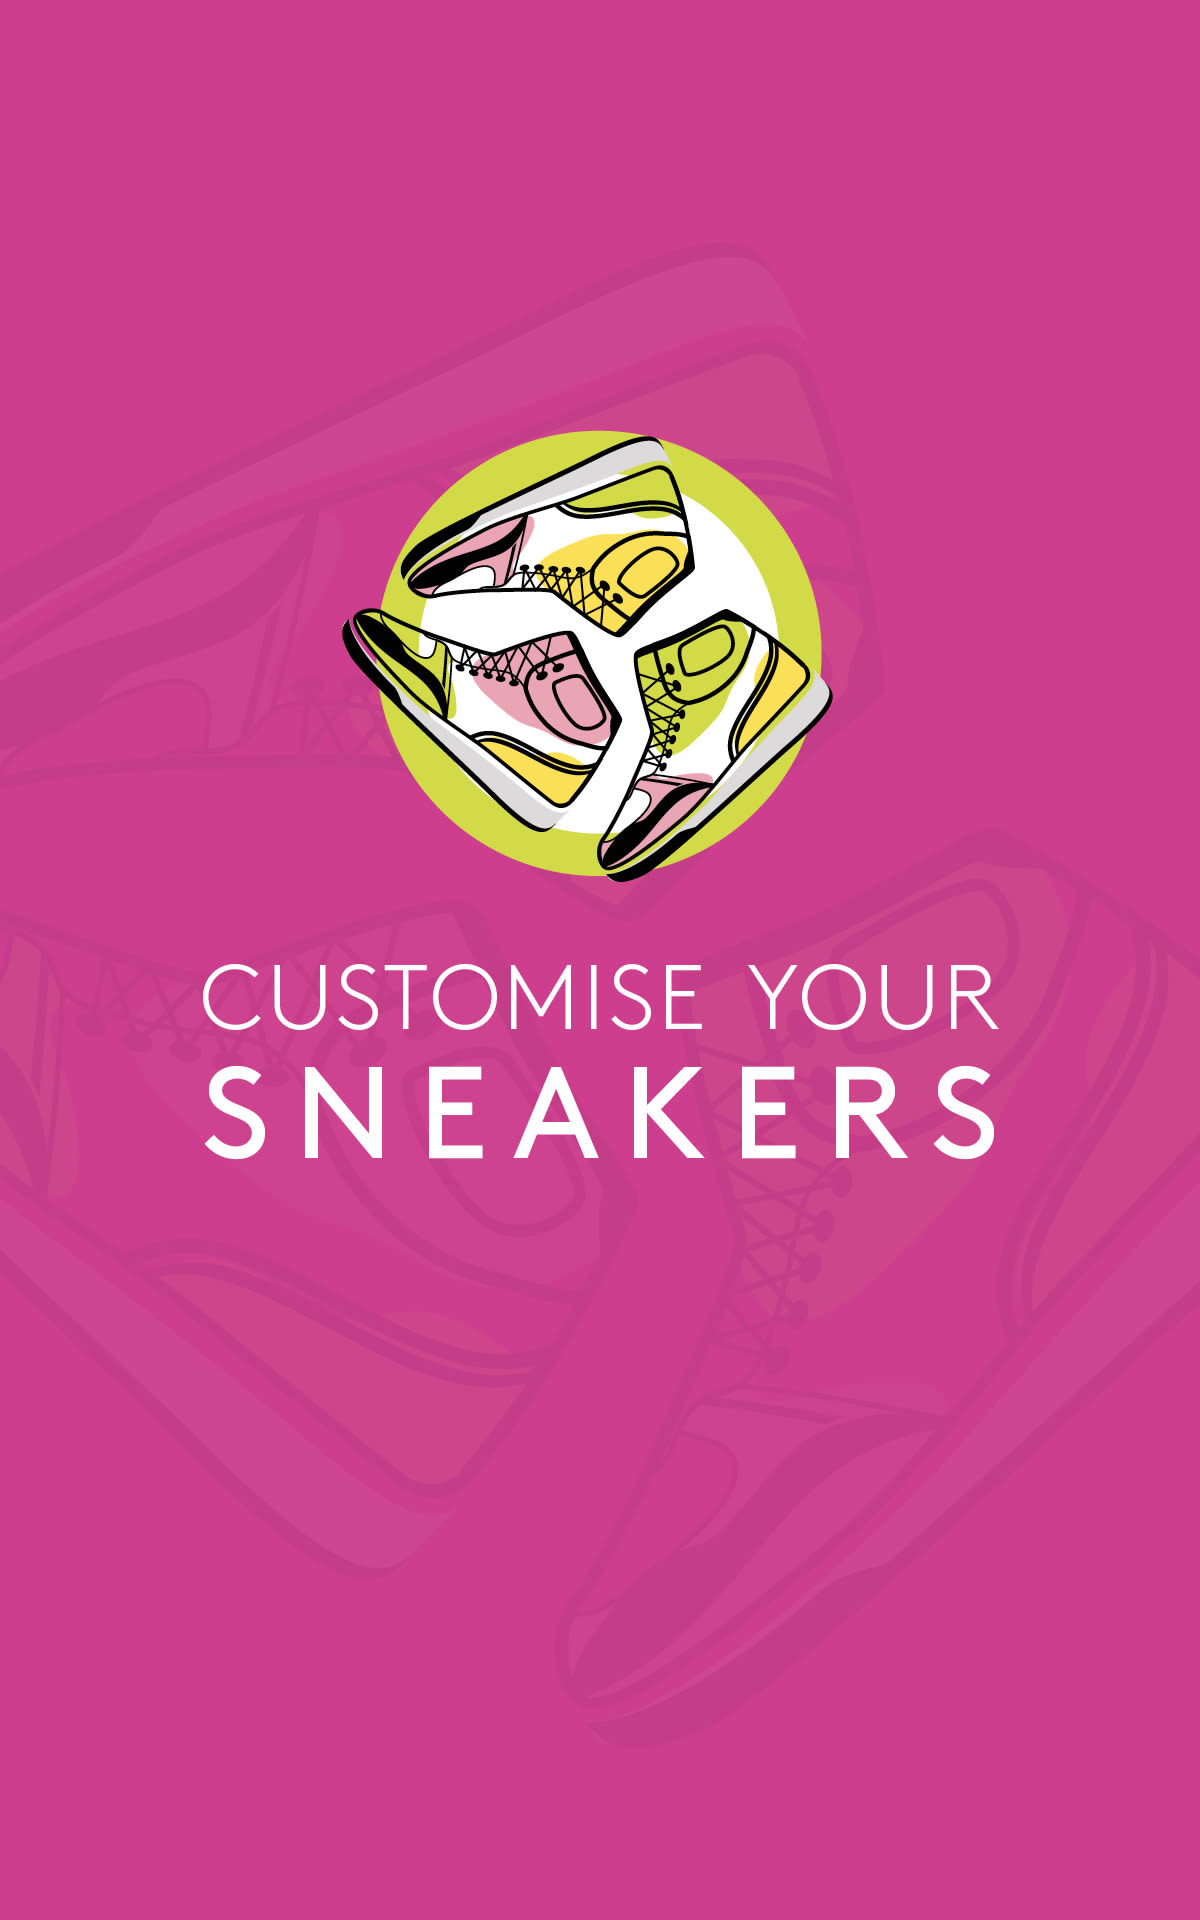 Customise your sneakers